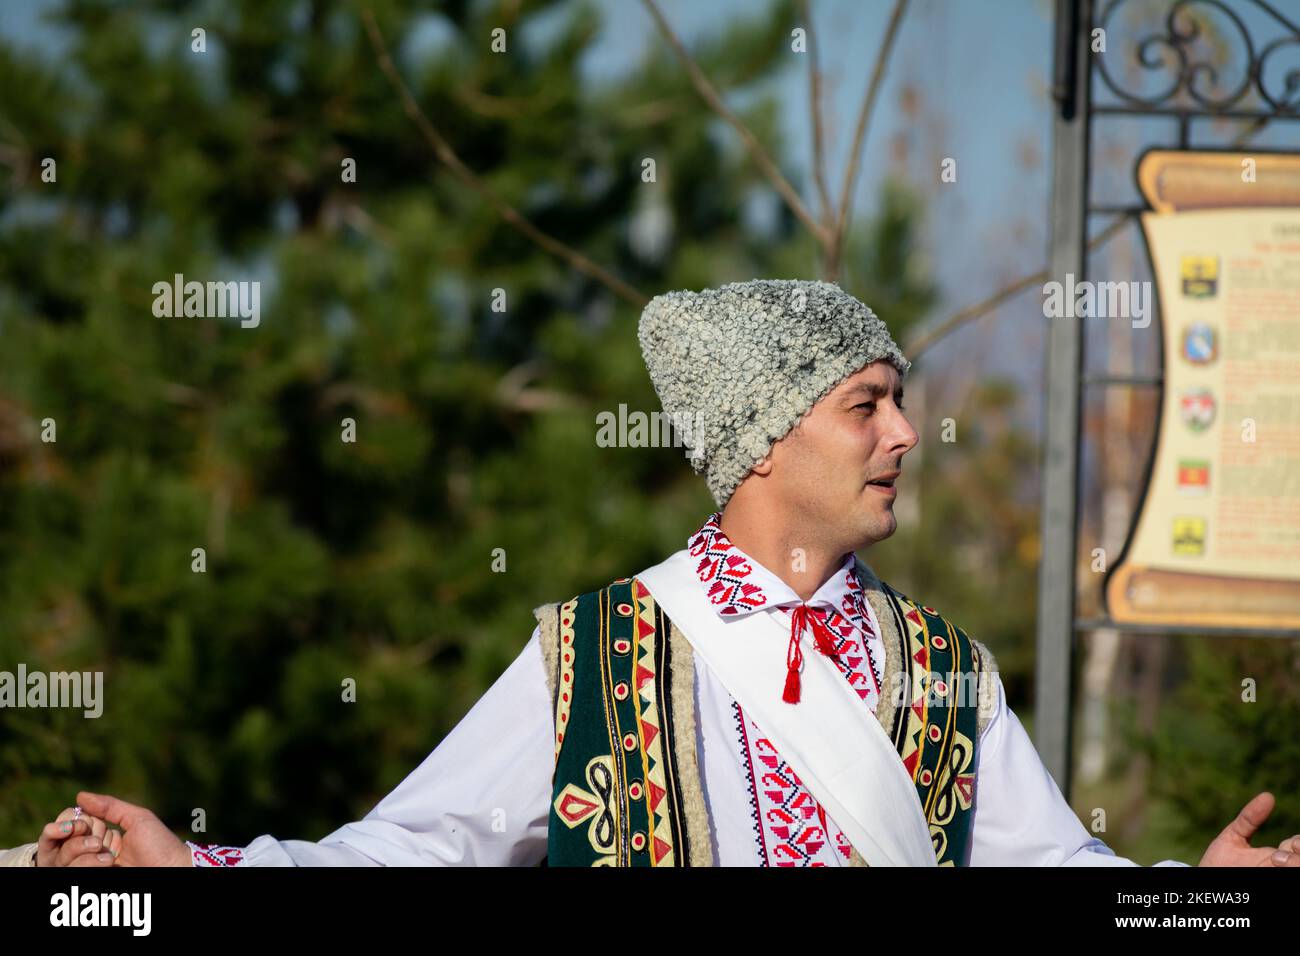 Bendery, Moldova - November 12, 2022: Man of European appearance in a national Mordovian costume dances traditional Chora dance during the Wine Day. s Stock Photo